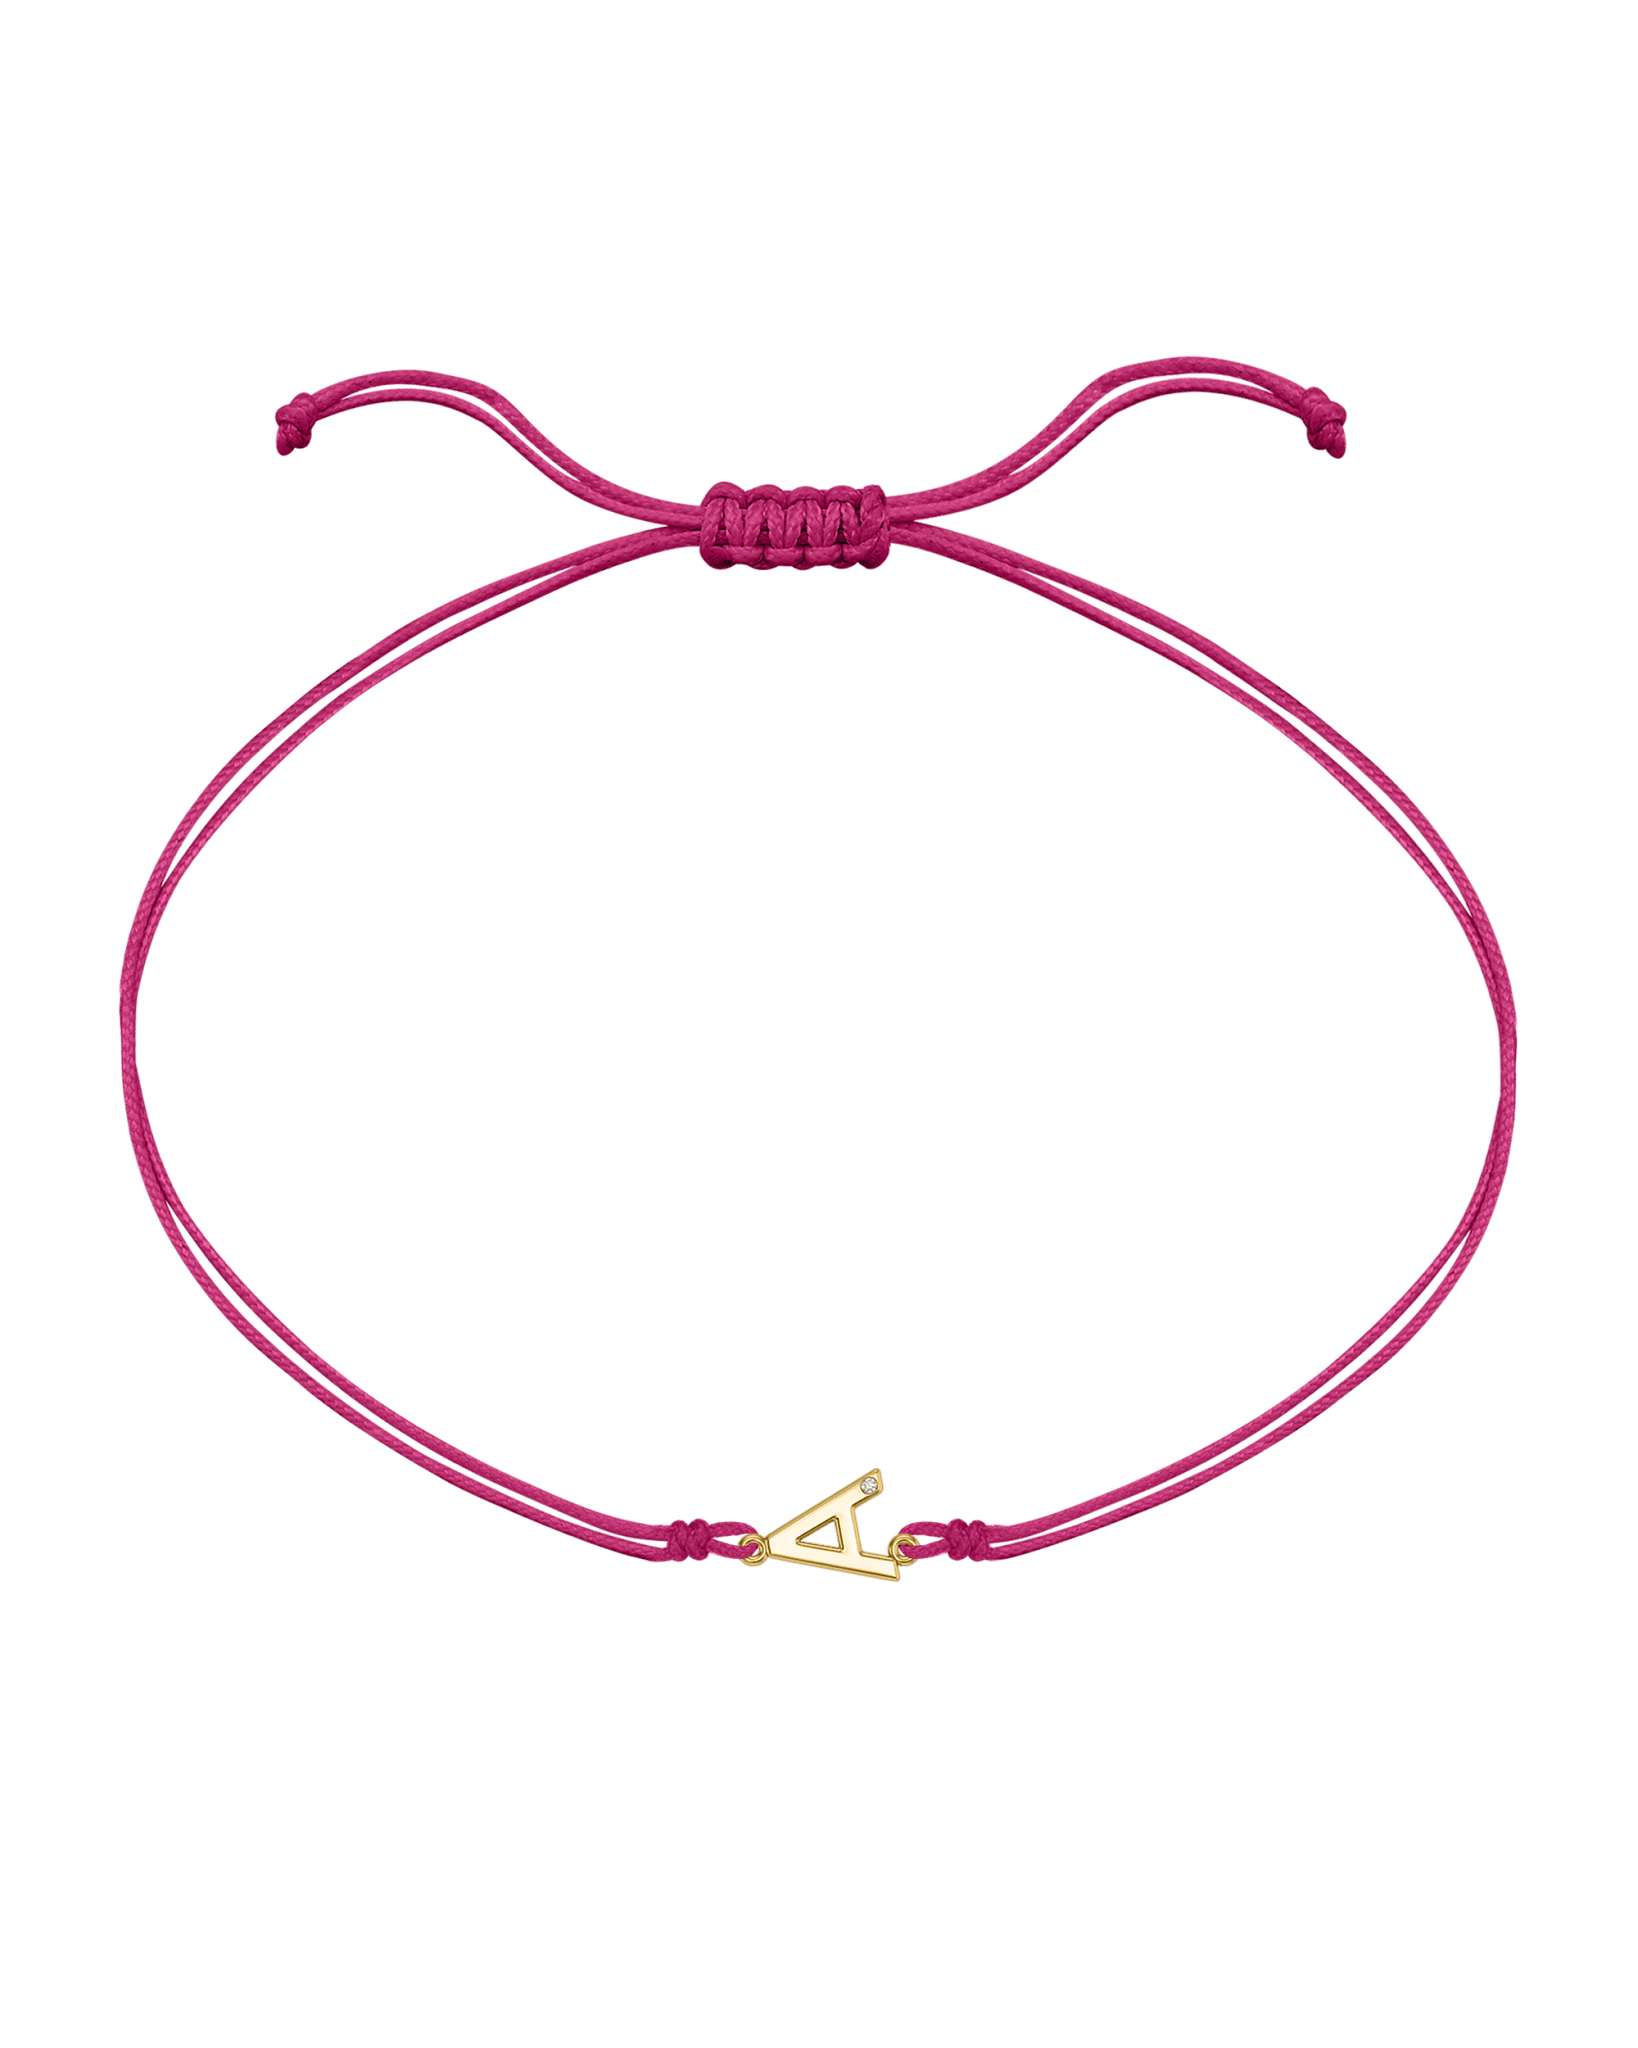 Initial String of Love - 14K Yellow Gold Bracelets 14K Solid Gold Pink 